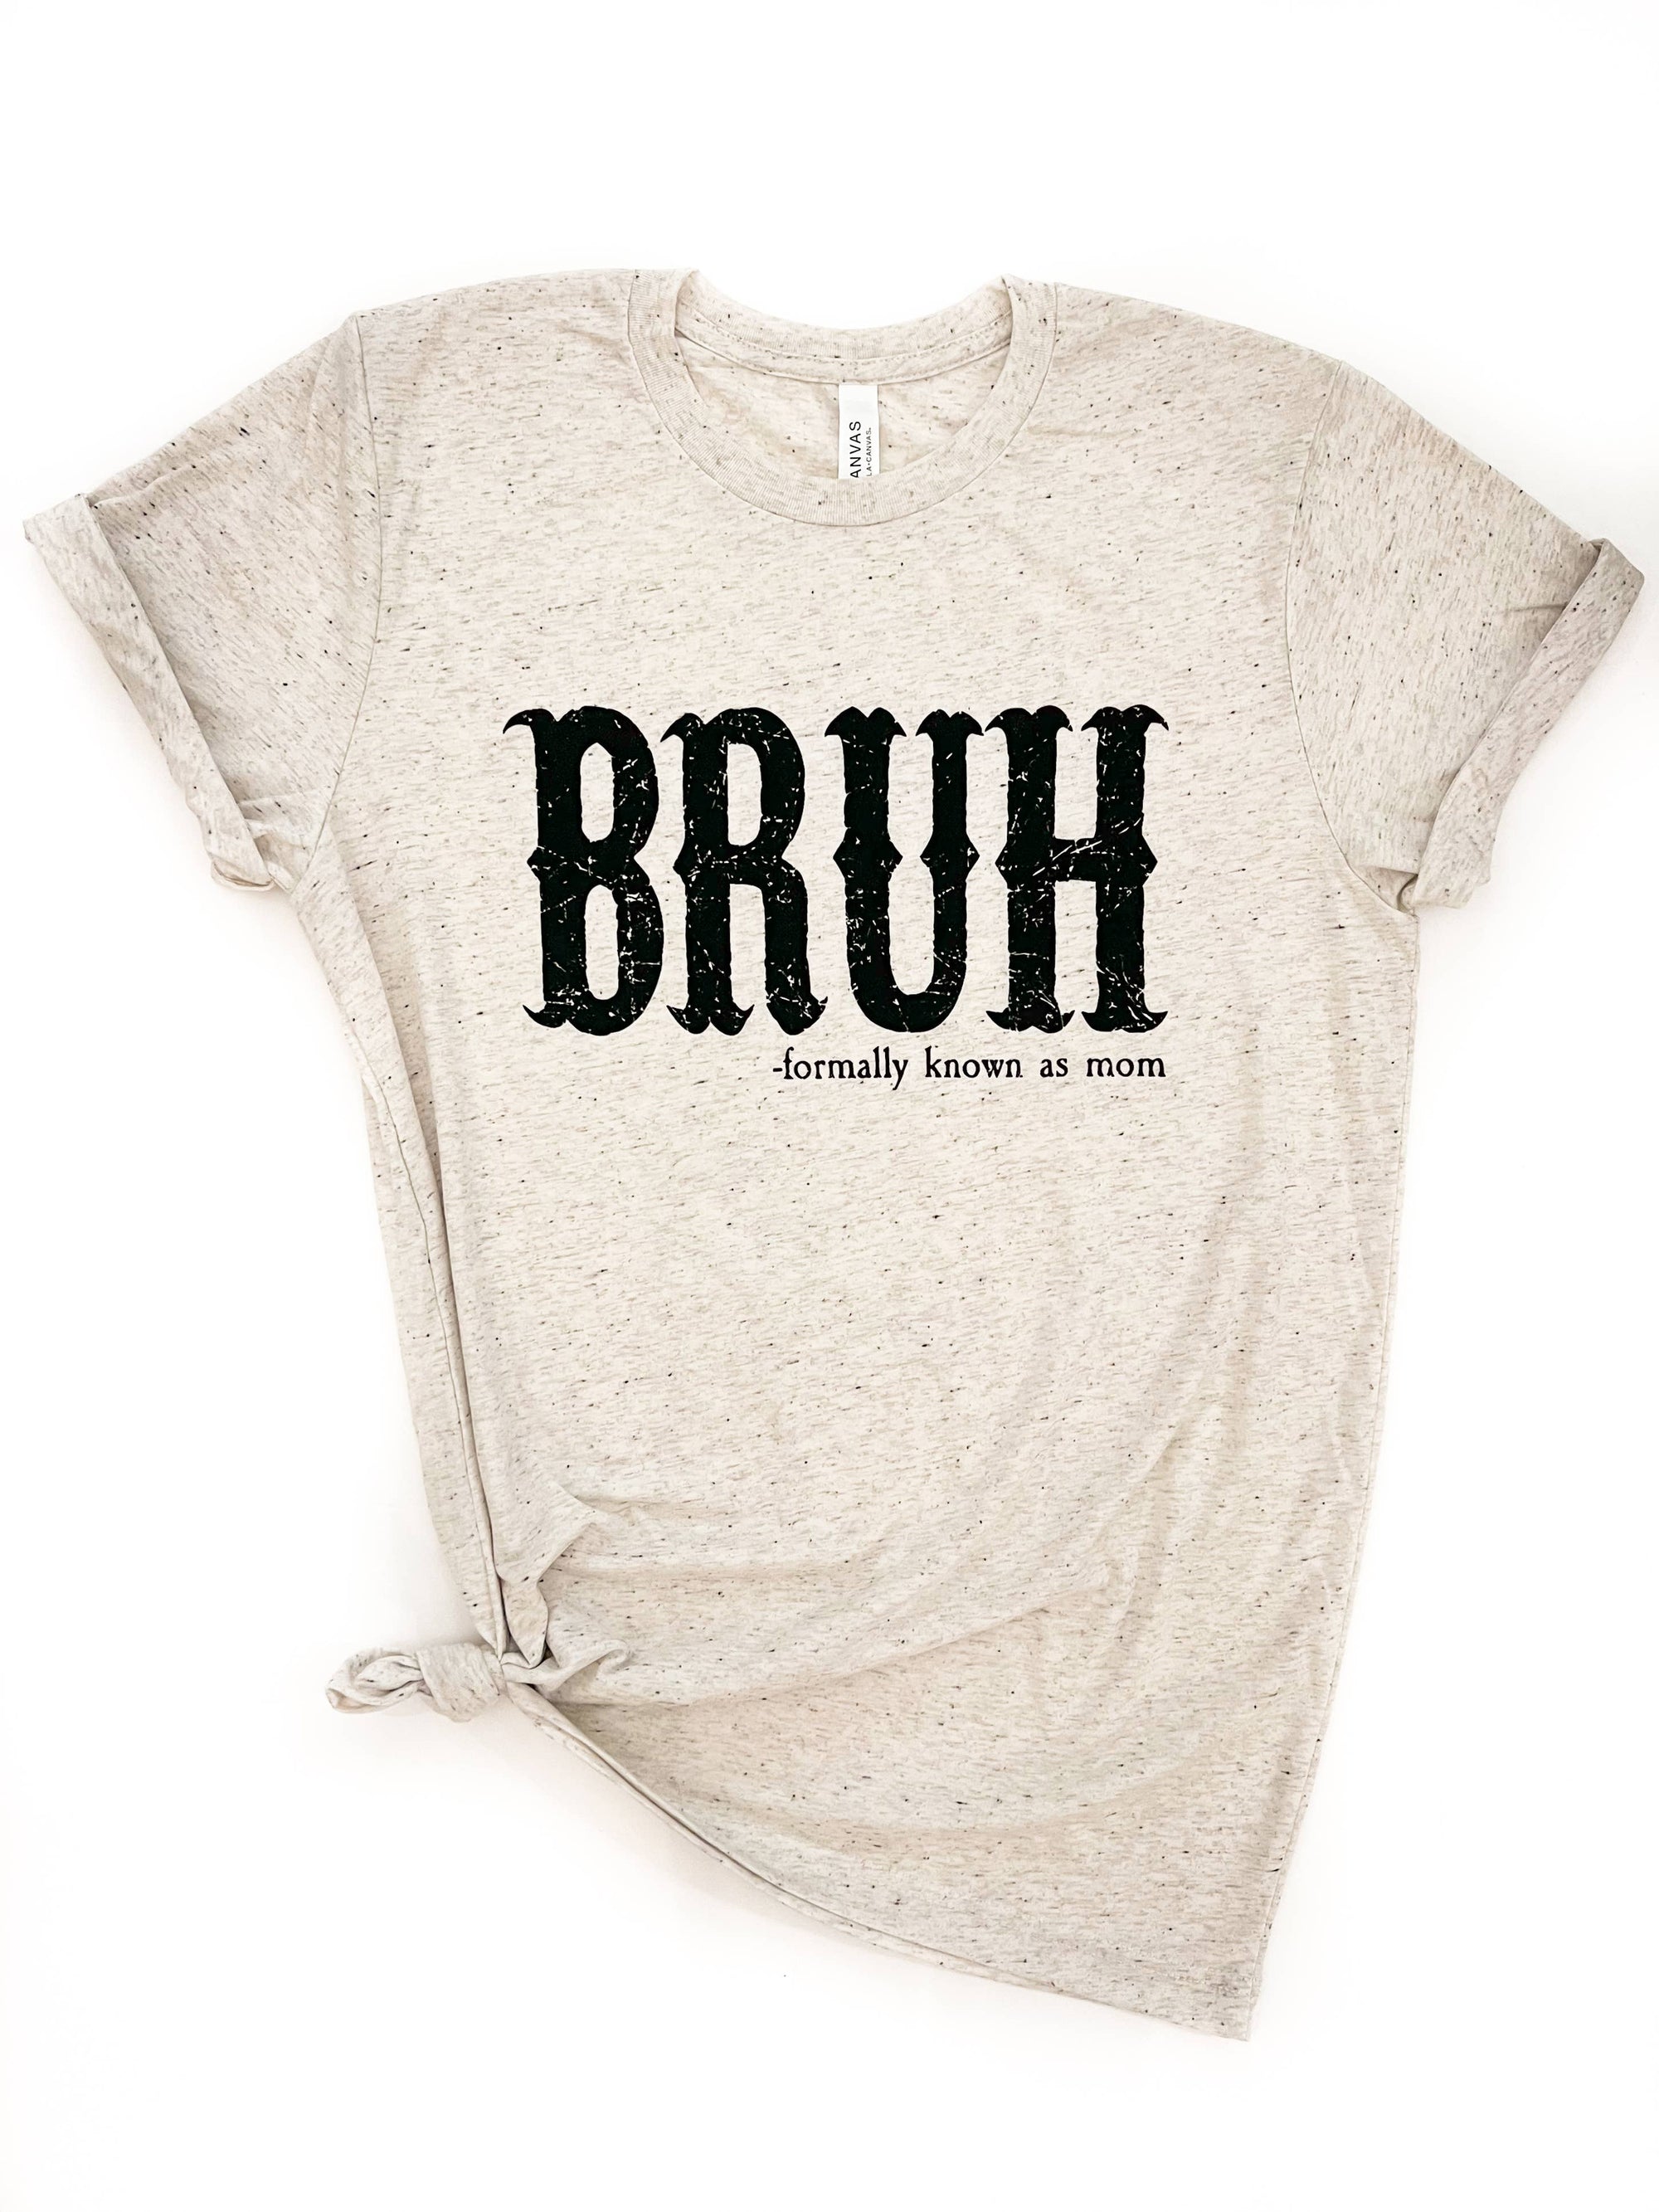 Bruh Formerly Known as Mom Funny Mom Tee: 2XL